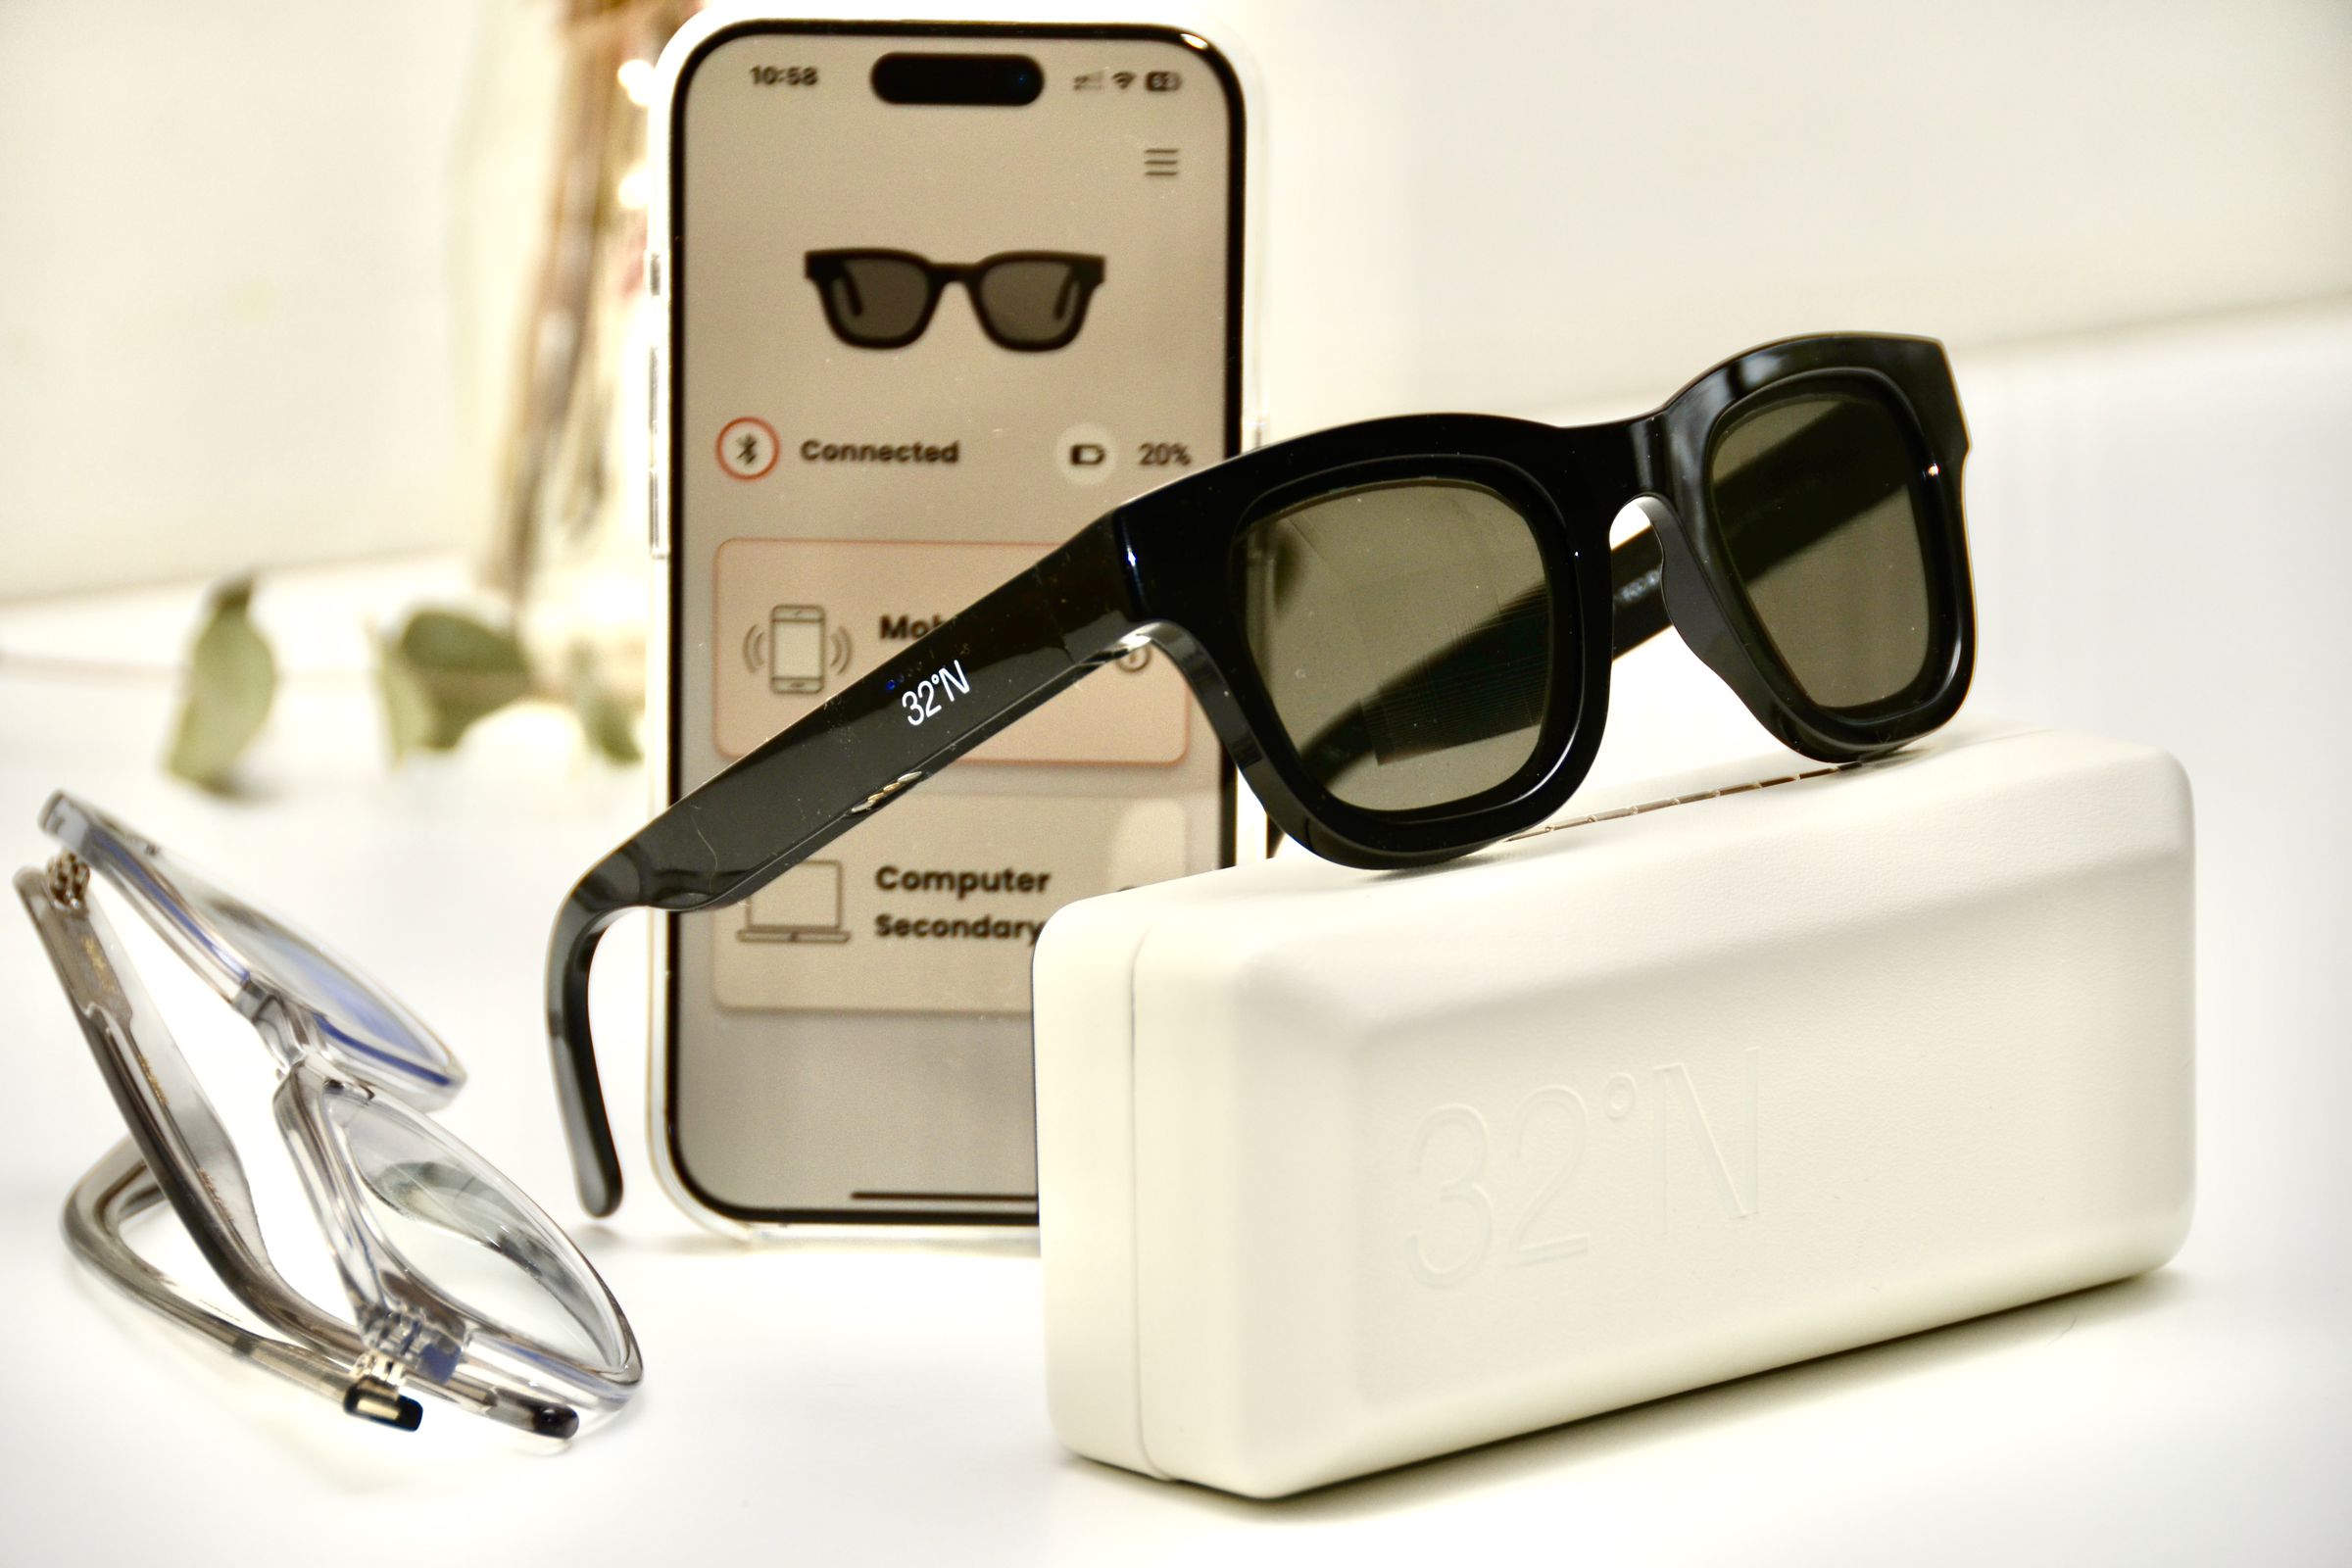 A pair of Muir sunglasses sit perched on top of their case in front of an iPhone open to the 32°N app showing 20 percent battery remaining on the sunglasses.